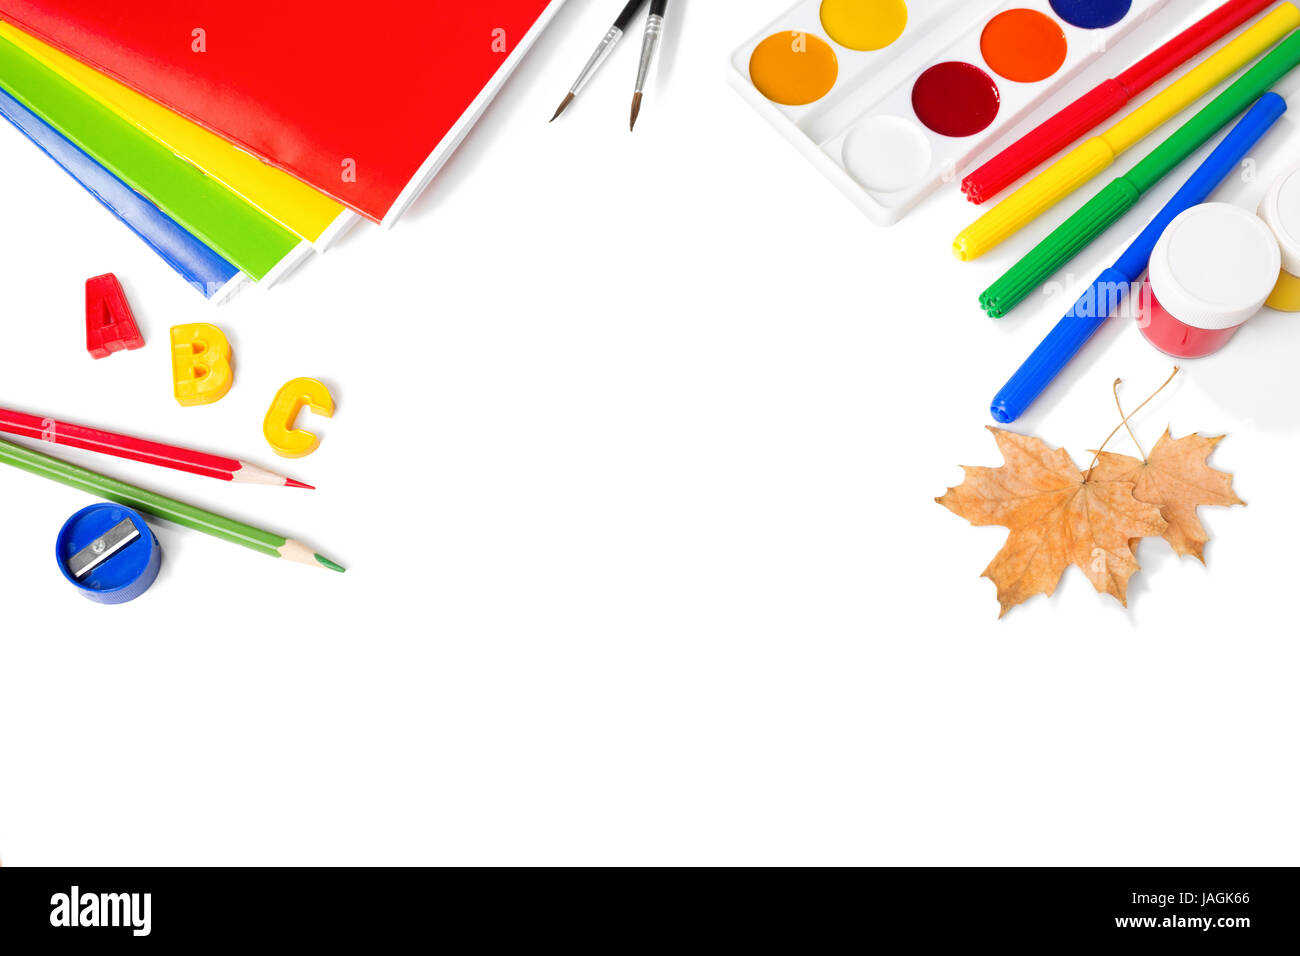 School equipment with pencils, paints , brushes and autumn leaves isolated on white. Back to school concept. School stationery Stock Photo